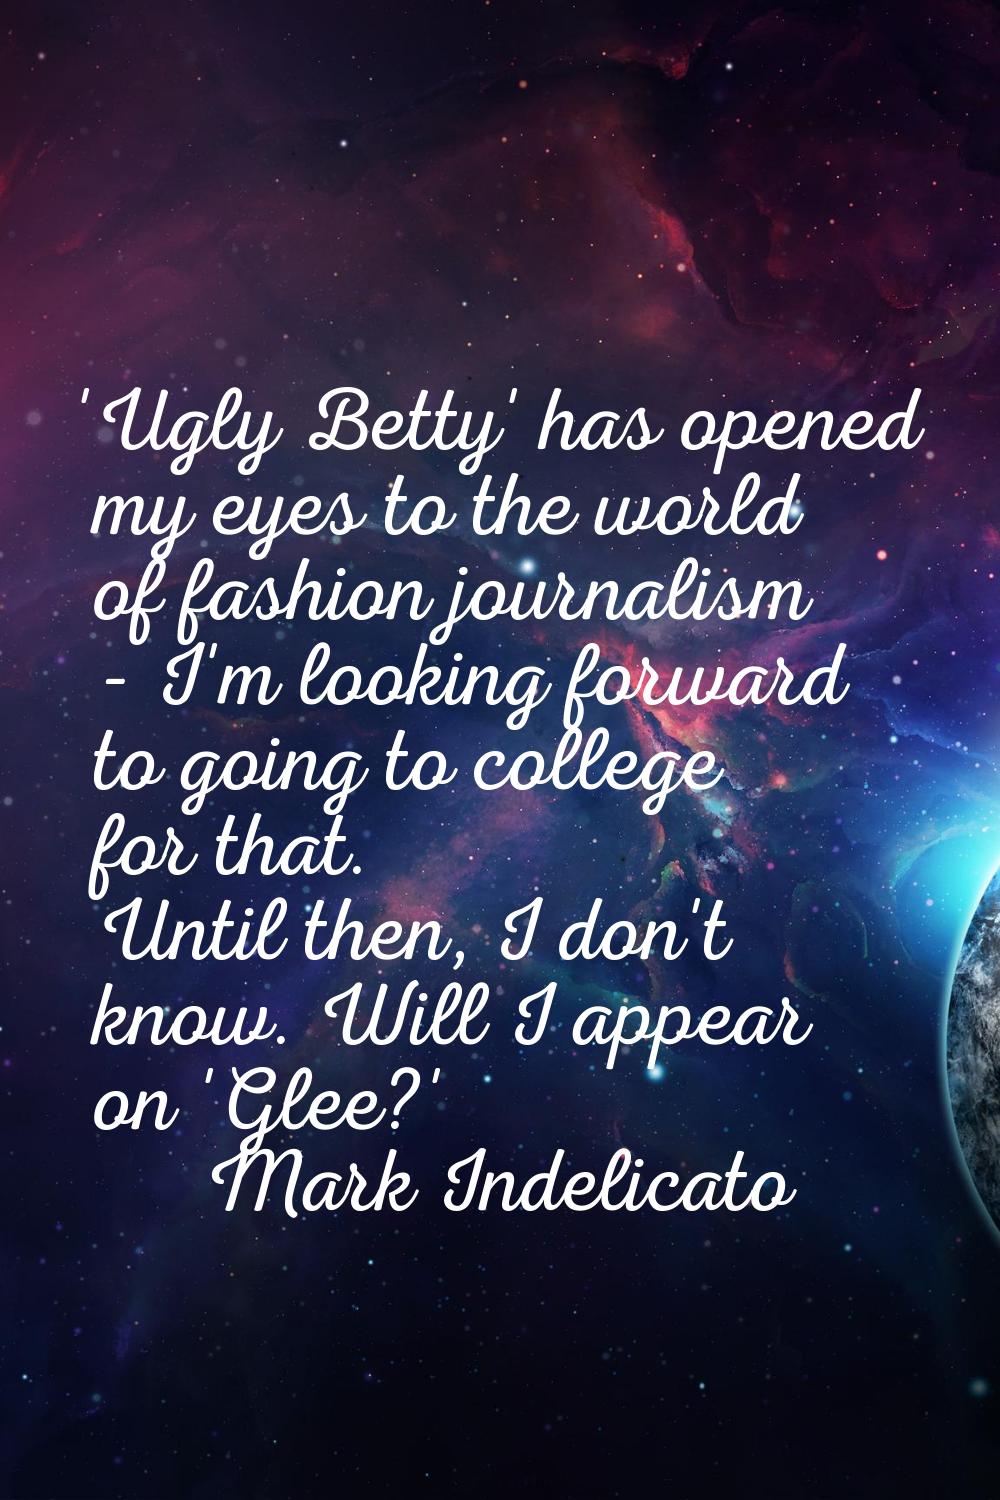 'Ugly Betty' has opened my eyes to the world of fashion journalism - I'm looking forward to going t